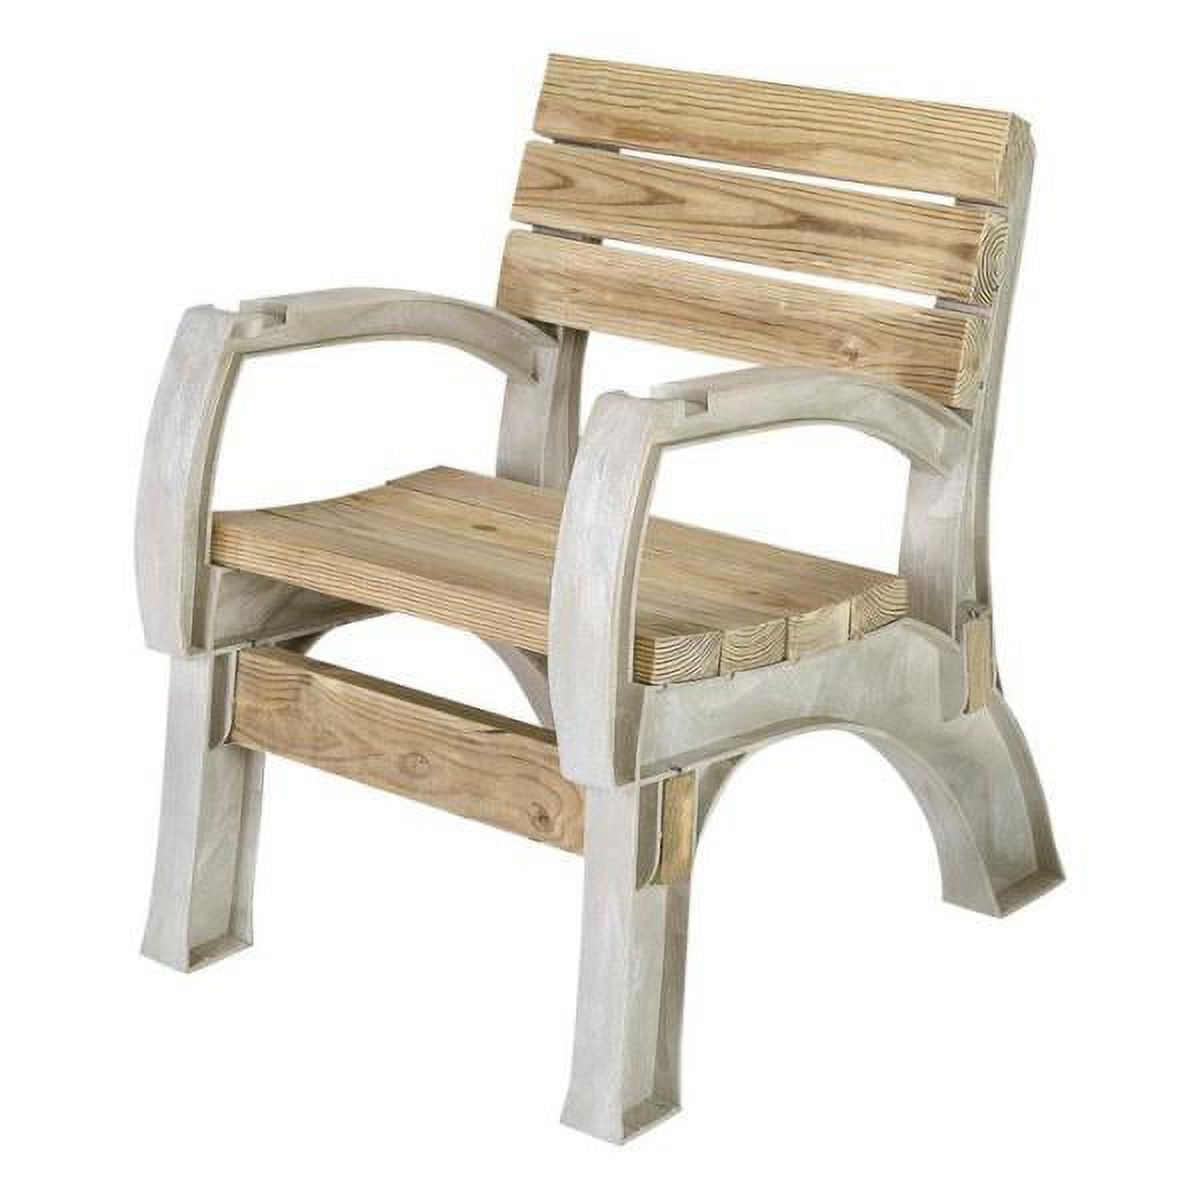 2x4basics AnySize Chair/Bench Ends Kit (lumber not included, only supports) - image 4 of 5